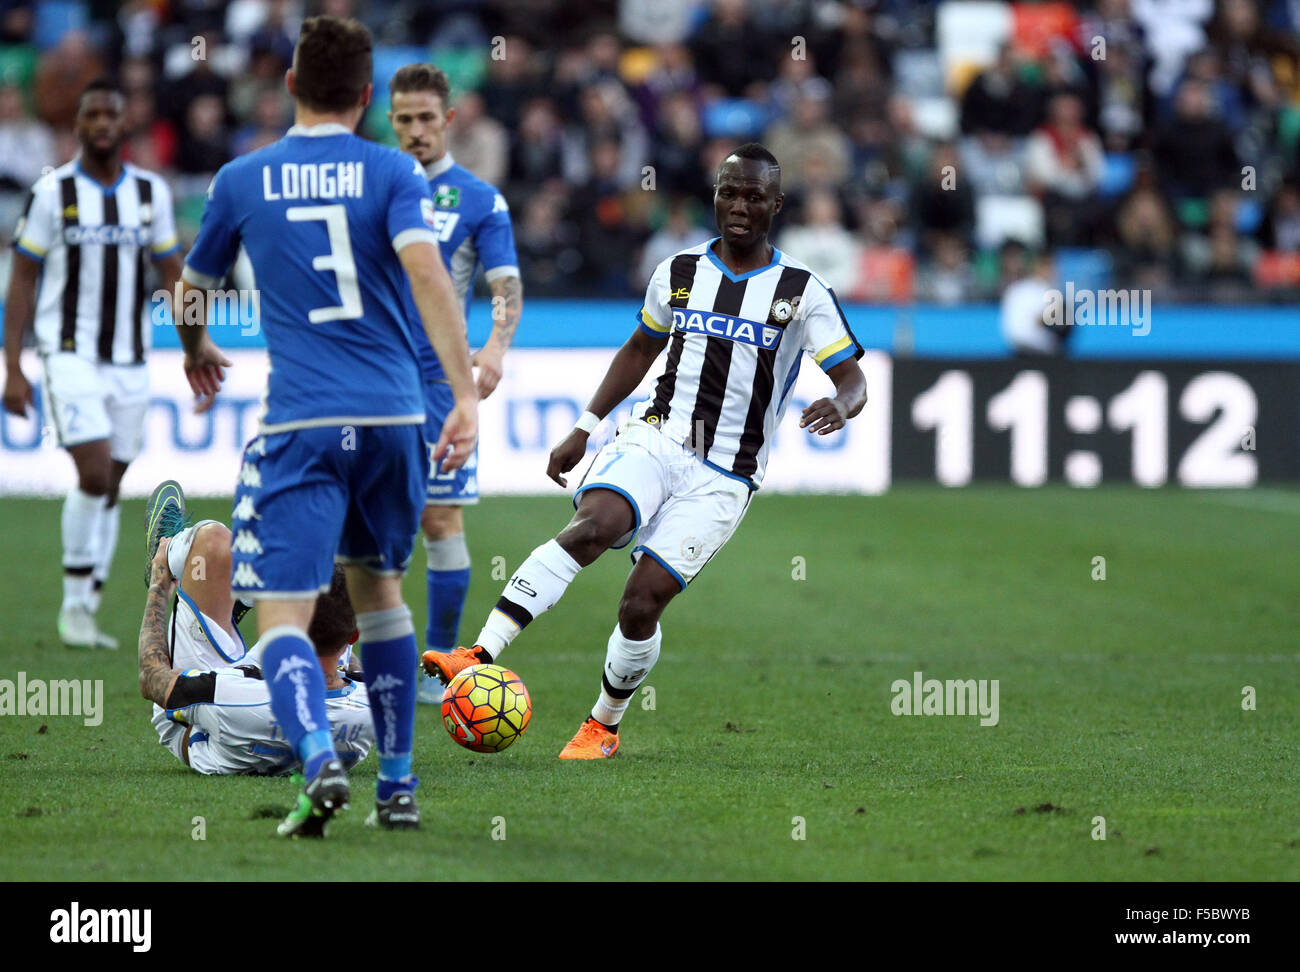 Udine, Italy. 1st November, 2015. Udinese's midfielder Emmanuel Agyemang Badu (R) controls the ball during the Italian Serie A football match between Udinese Calcio v Sassuolo Calcio at Friuli Stadium on 1st November, 2015 in Udine. Credit:  Andrea Spinelli/Alamy Live News Stock Photo